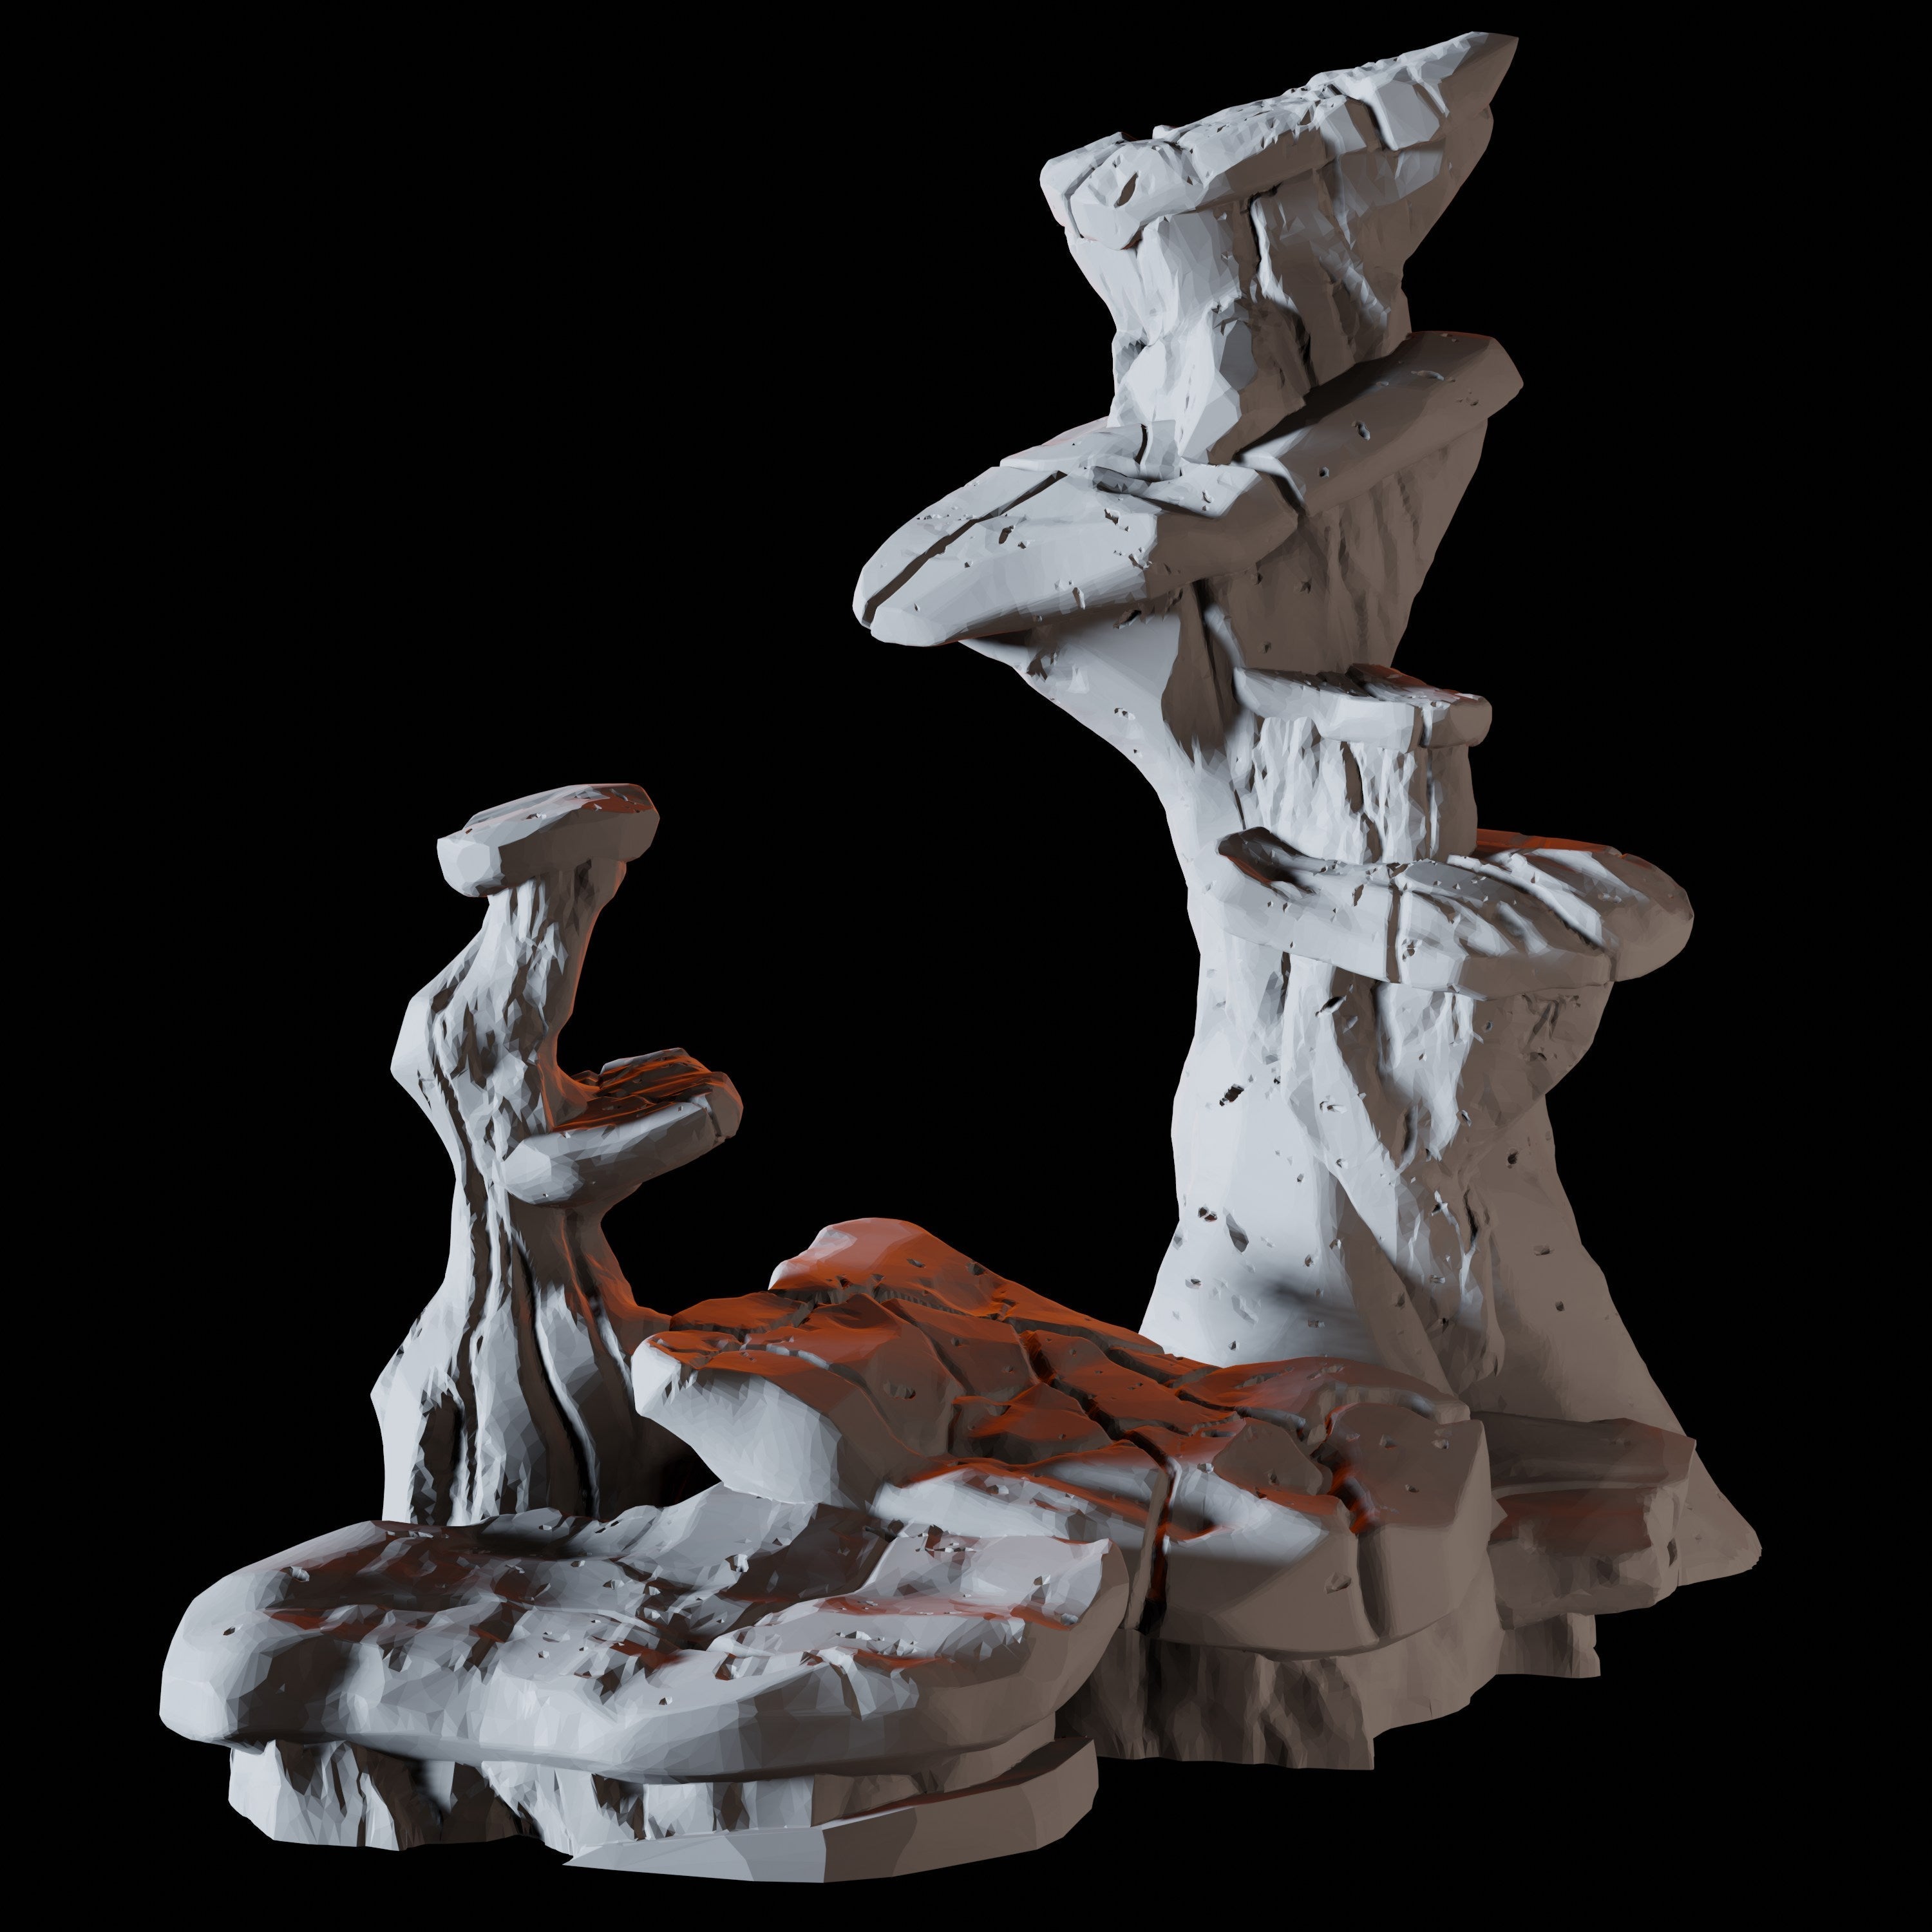 15 Cave Scatter Terrain Miniatures Miniature for Dungeons and Dragons